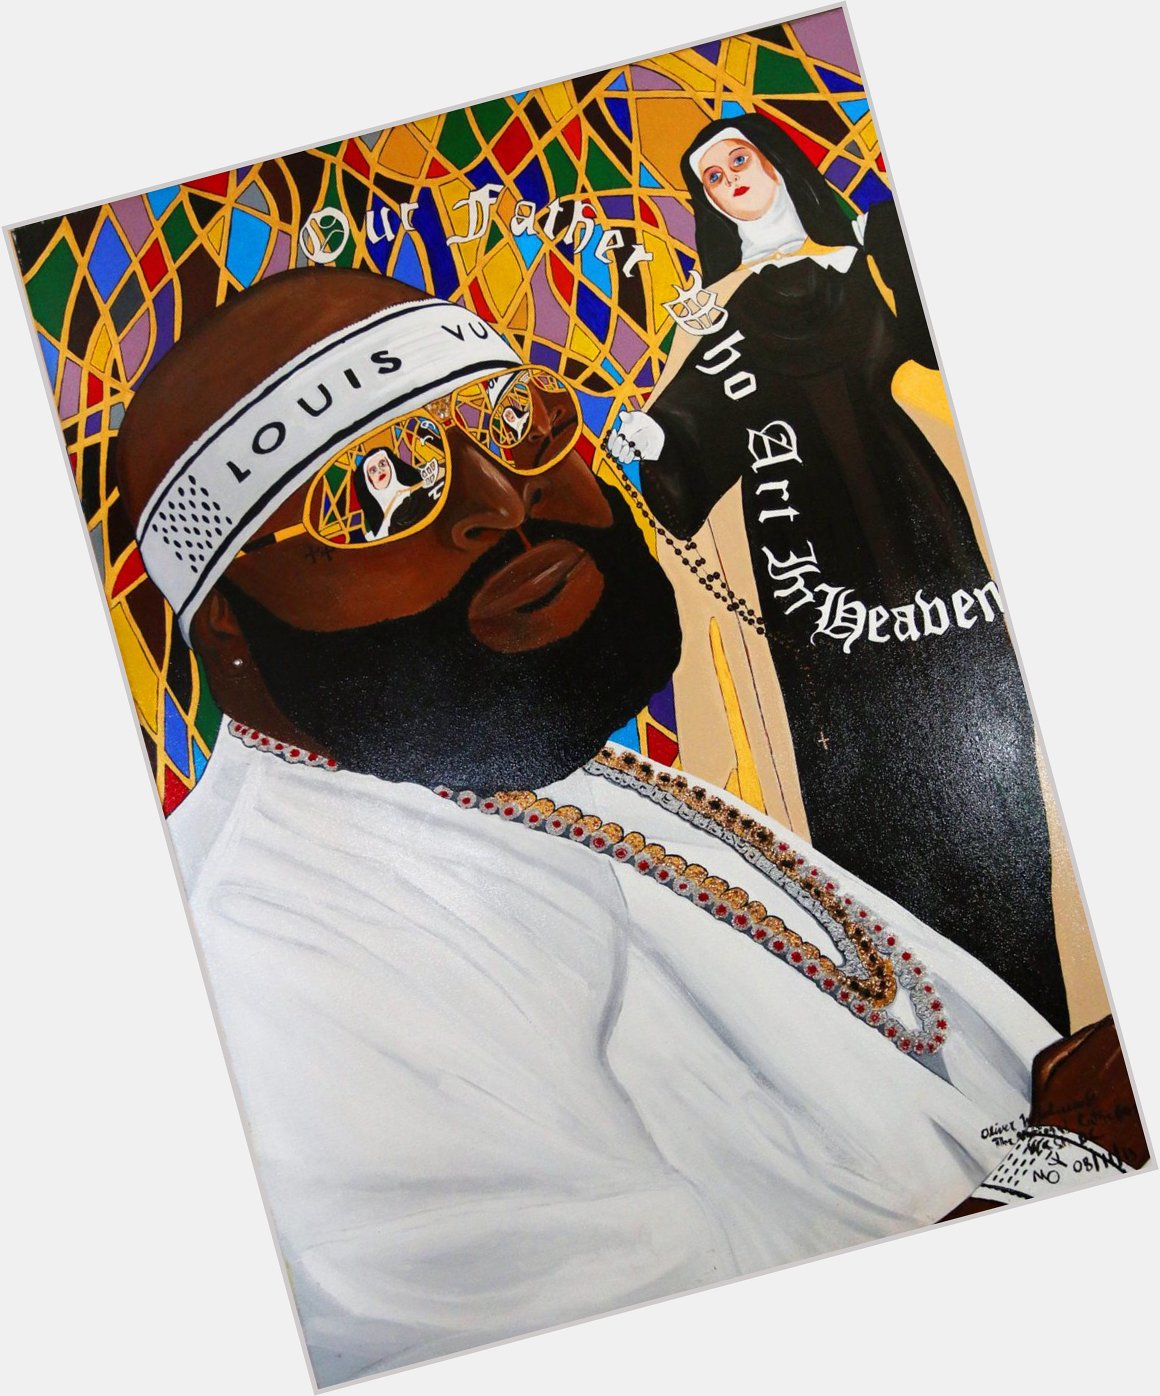  Painting Apostles Creed Featuring Rick Ross By Oliver W. Johnson of Transitional Arts.  Happy Birthday 